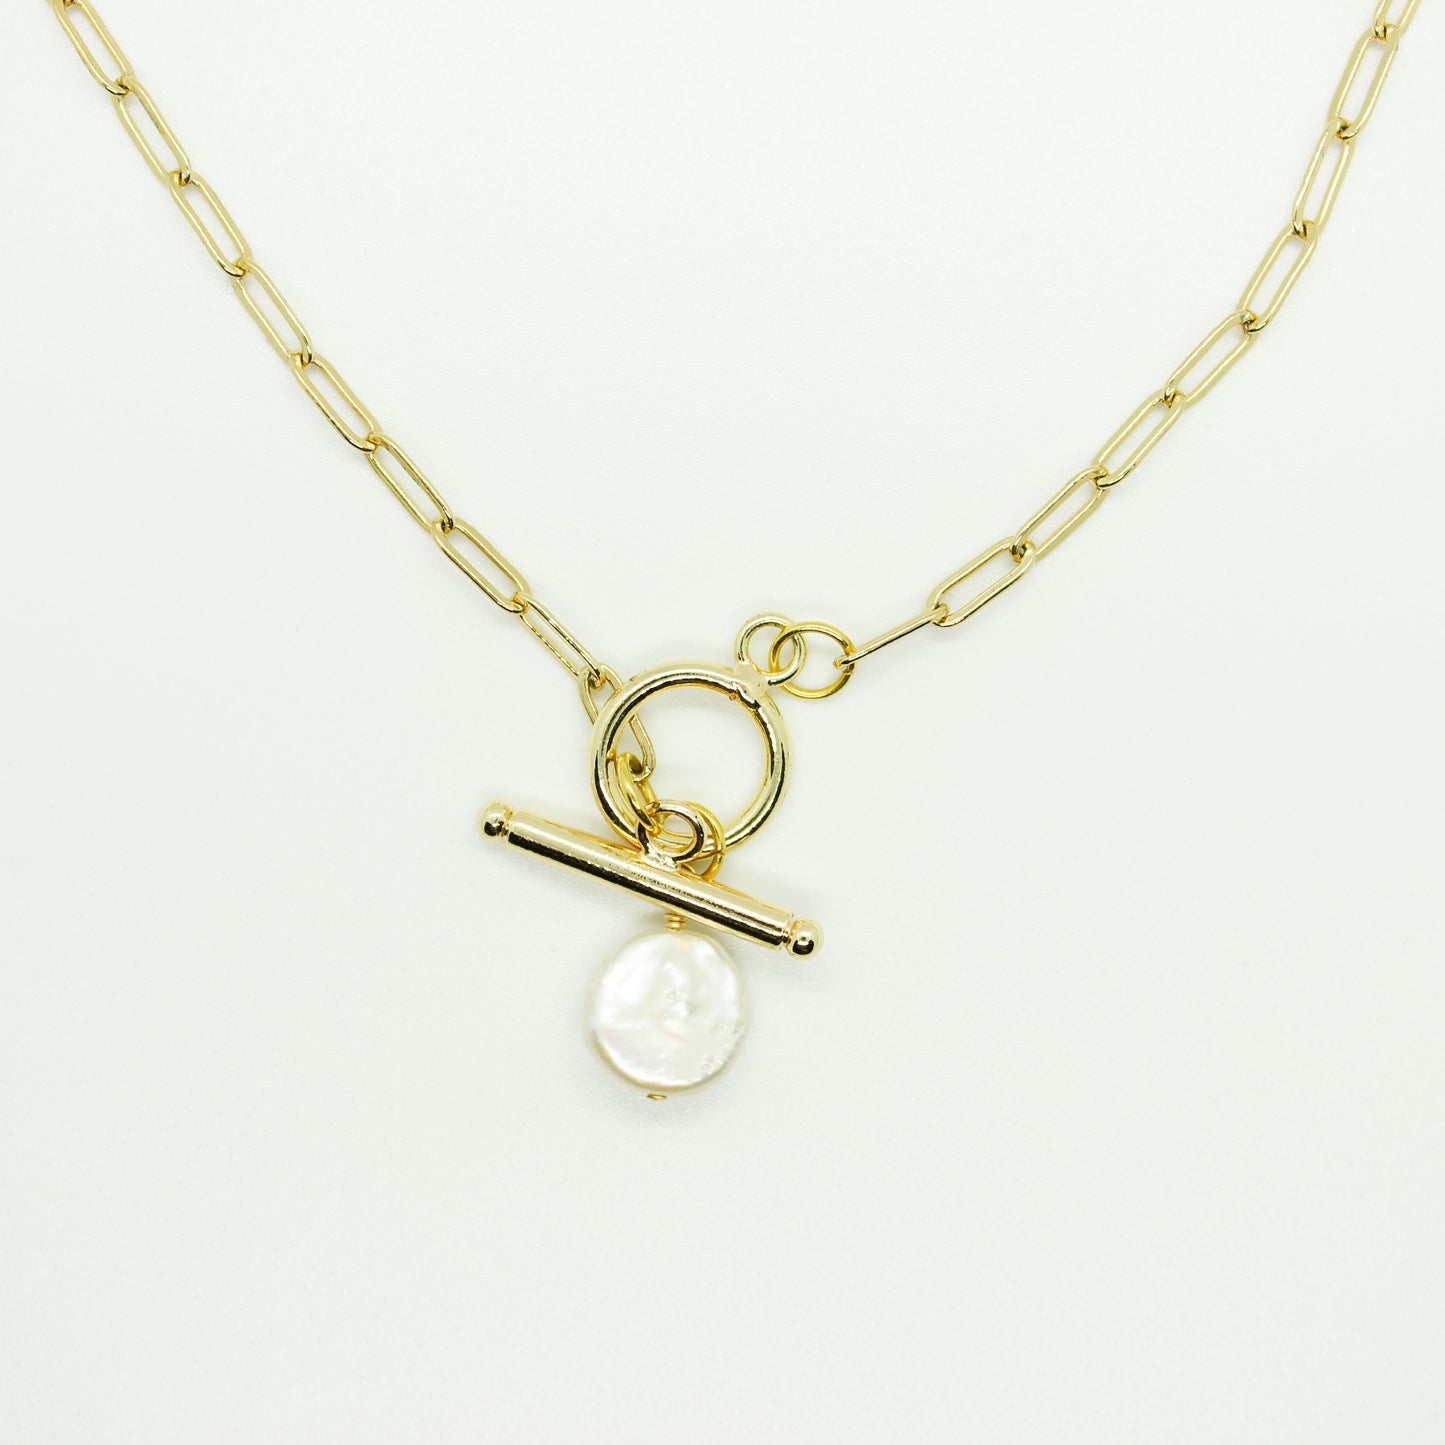 Gold Paperclip Chain Necklace with Coin Pearl Charm